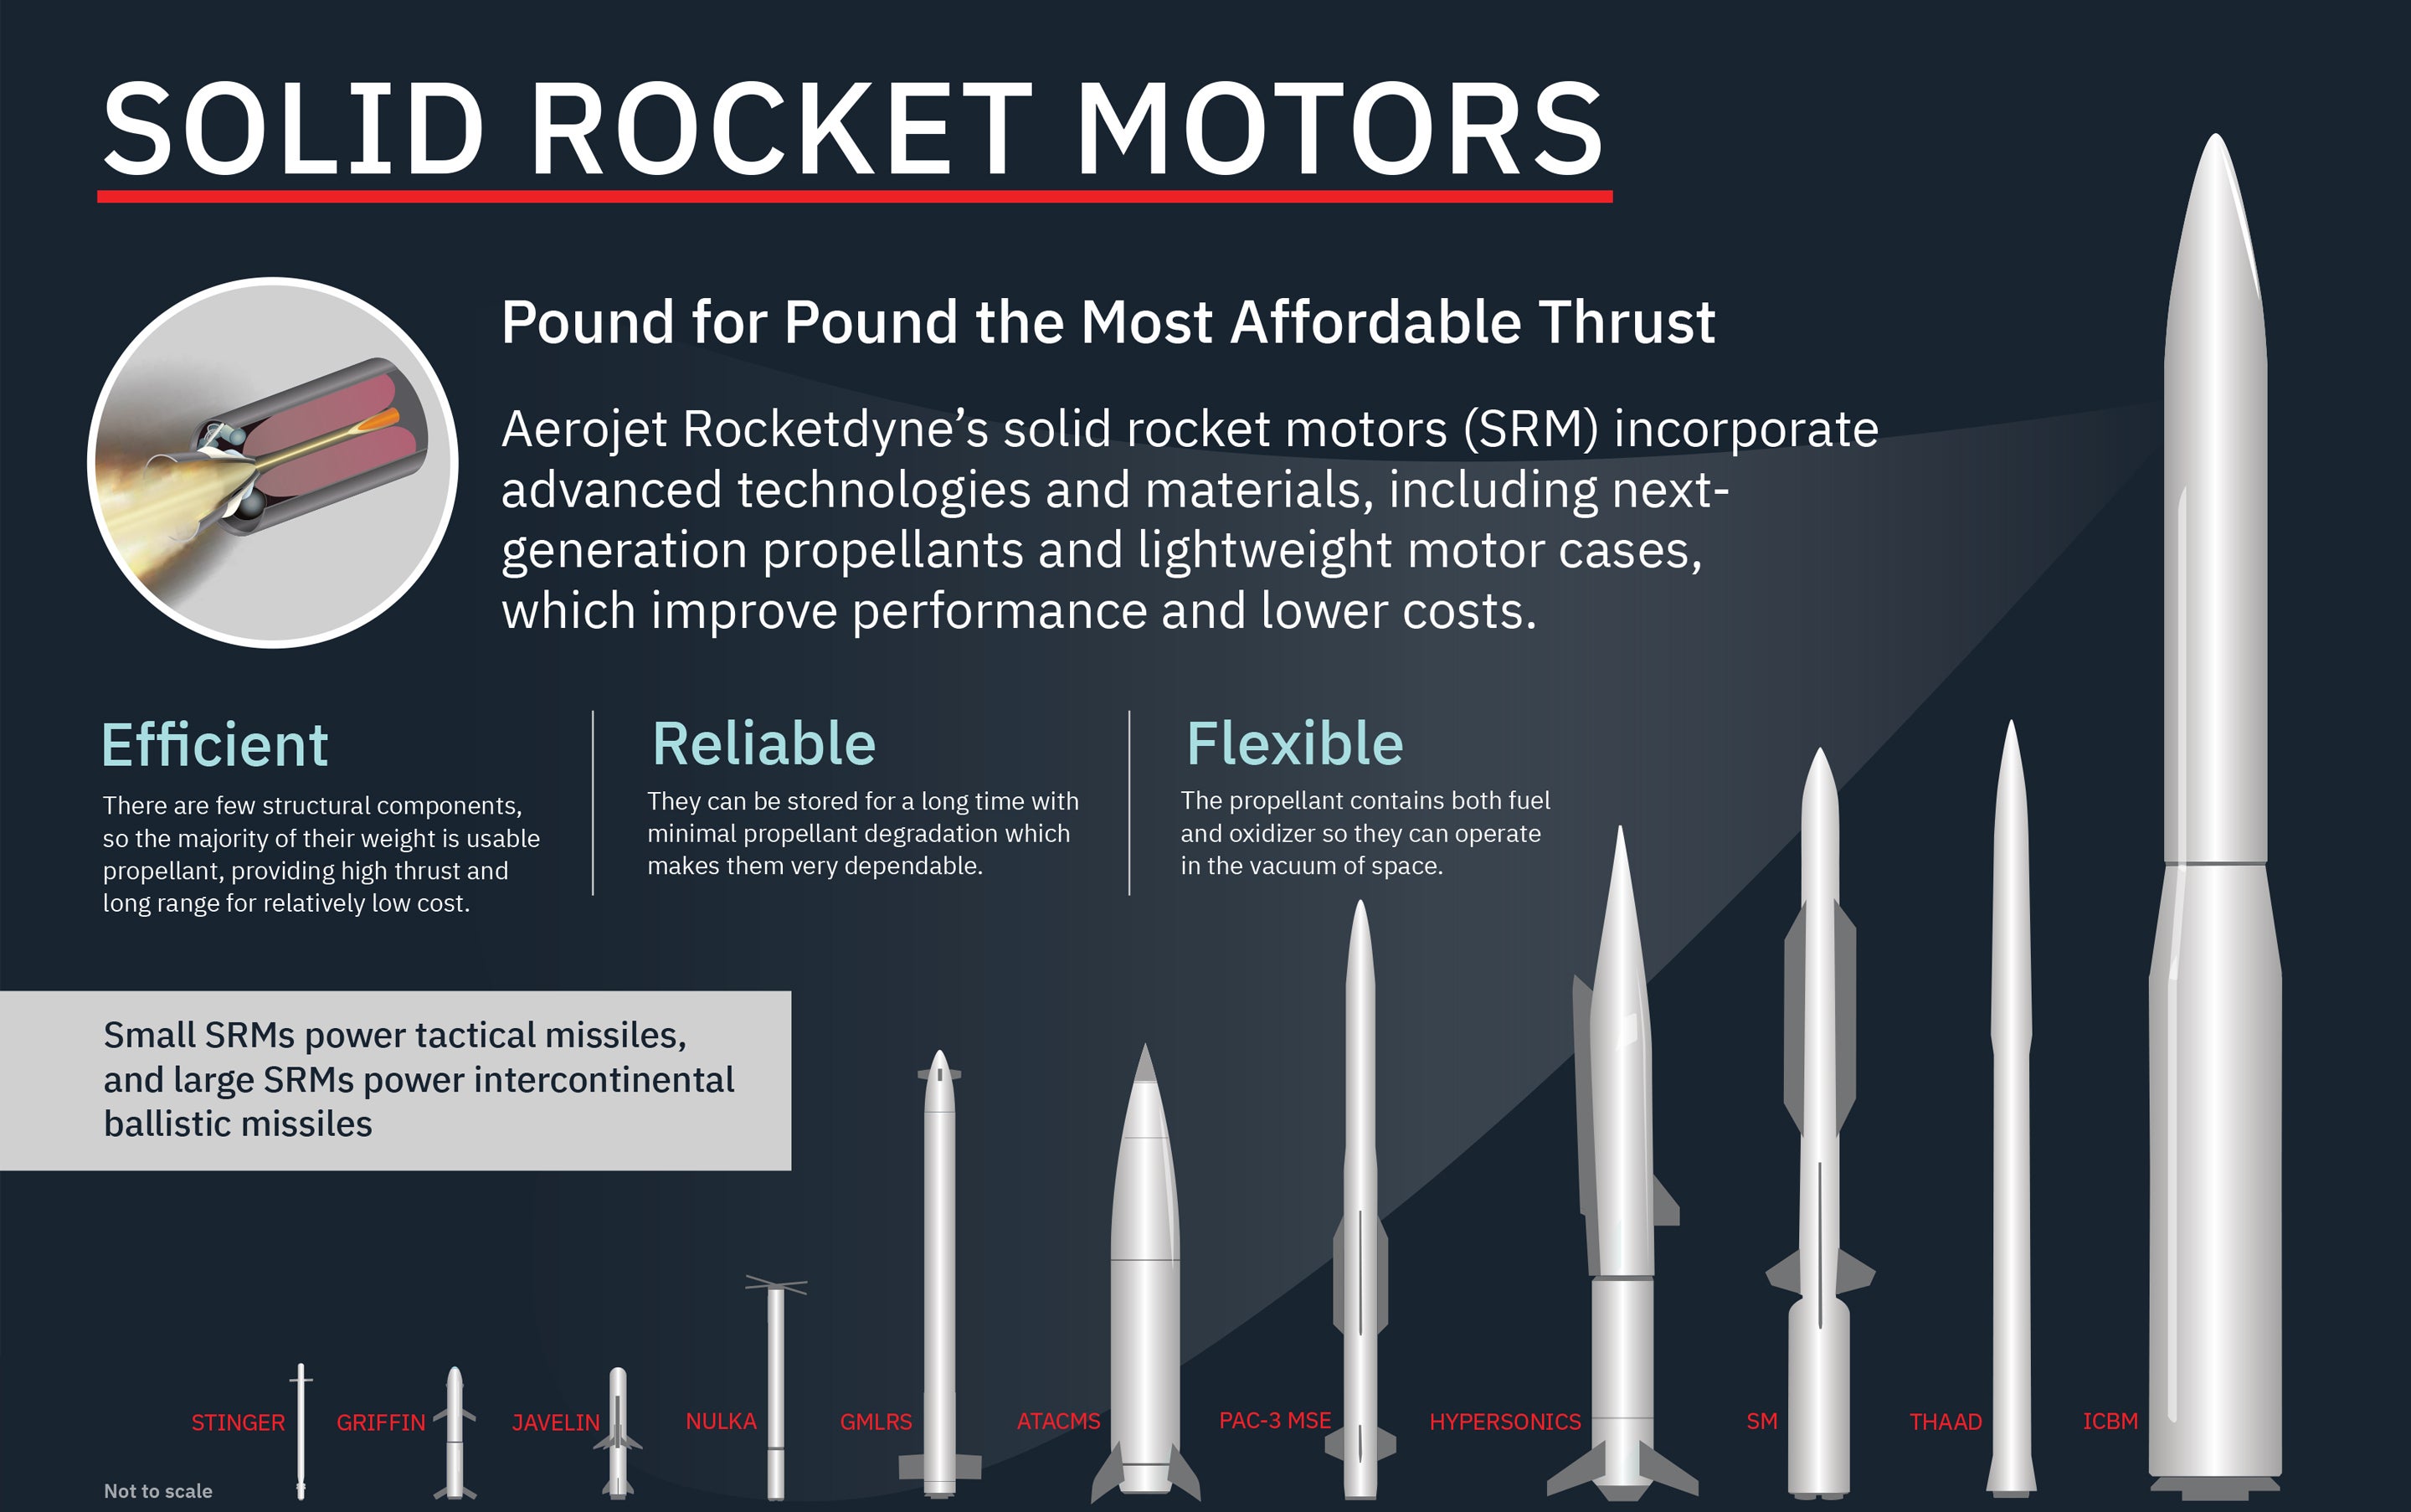 Infographic comparing various solid rocket motor products.